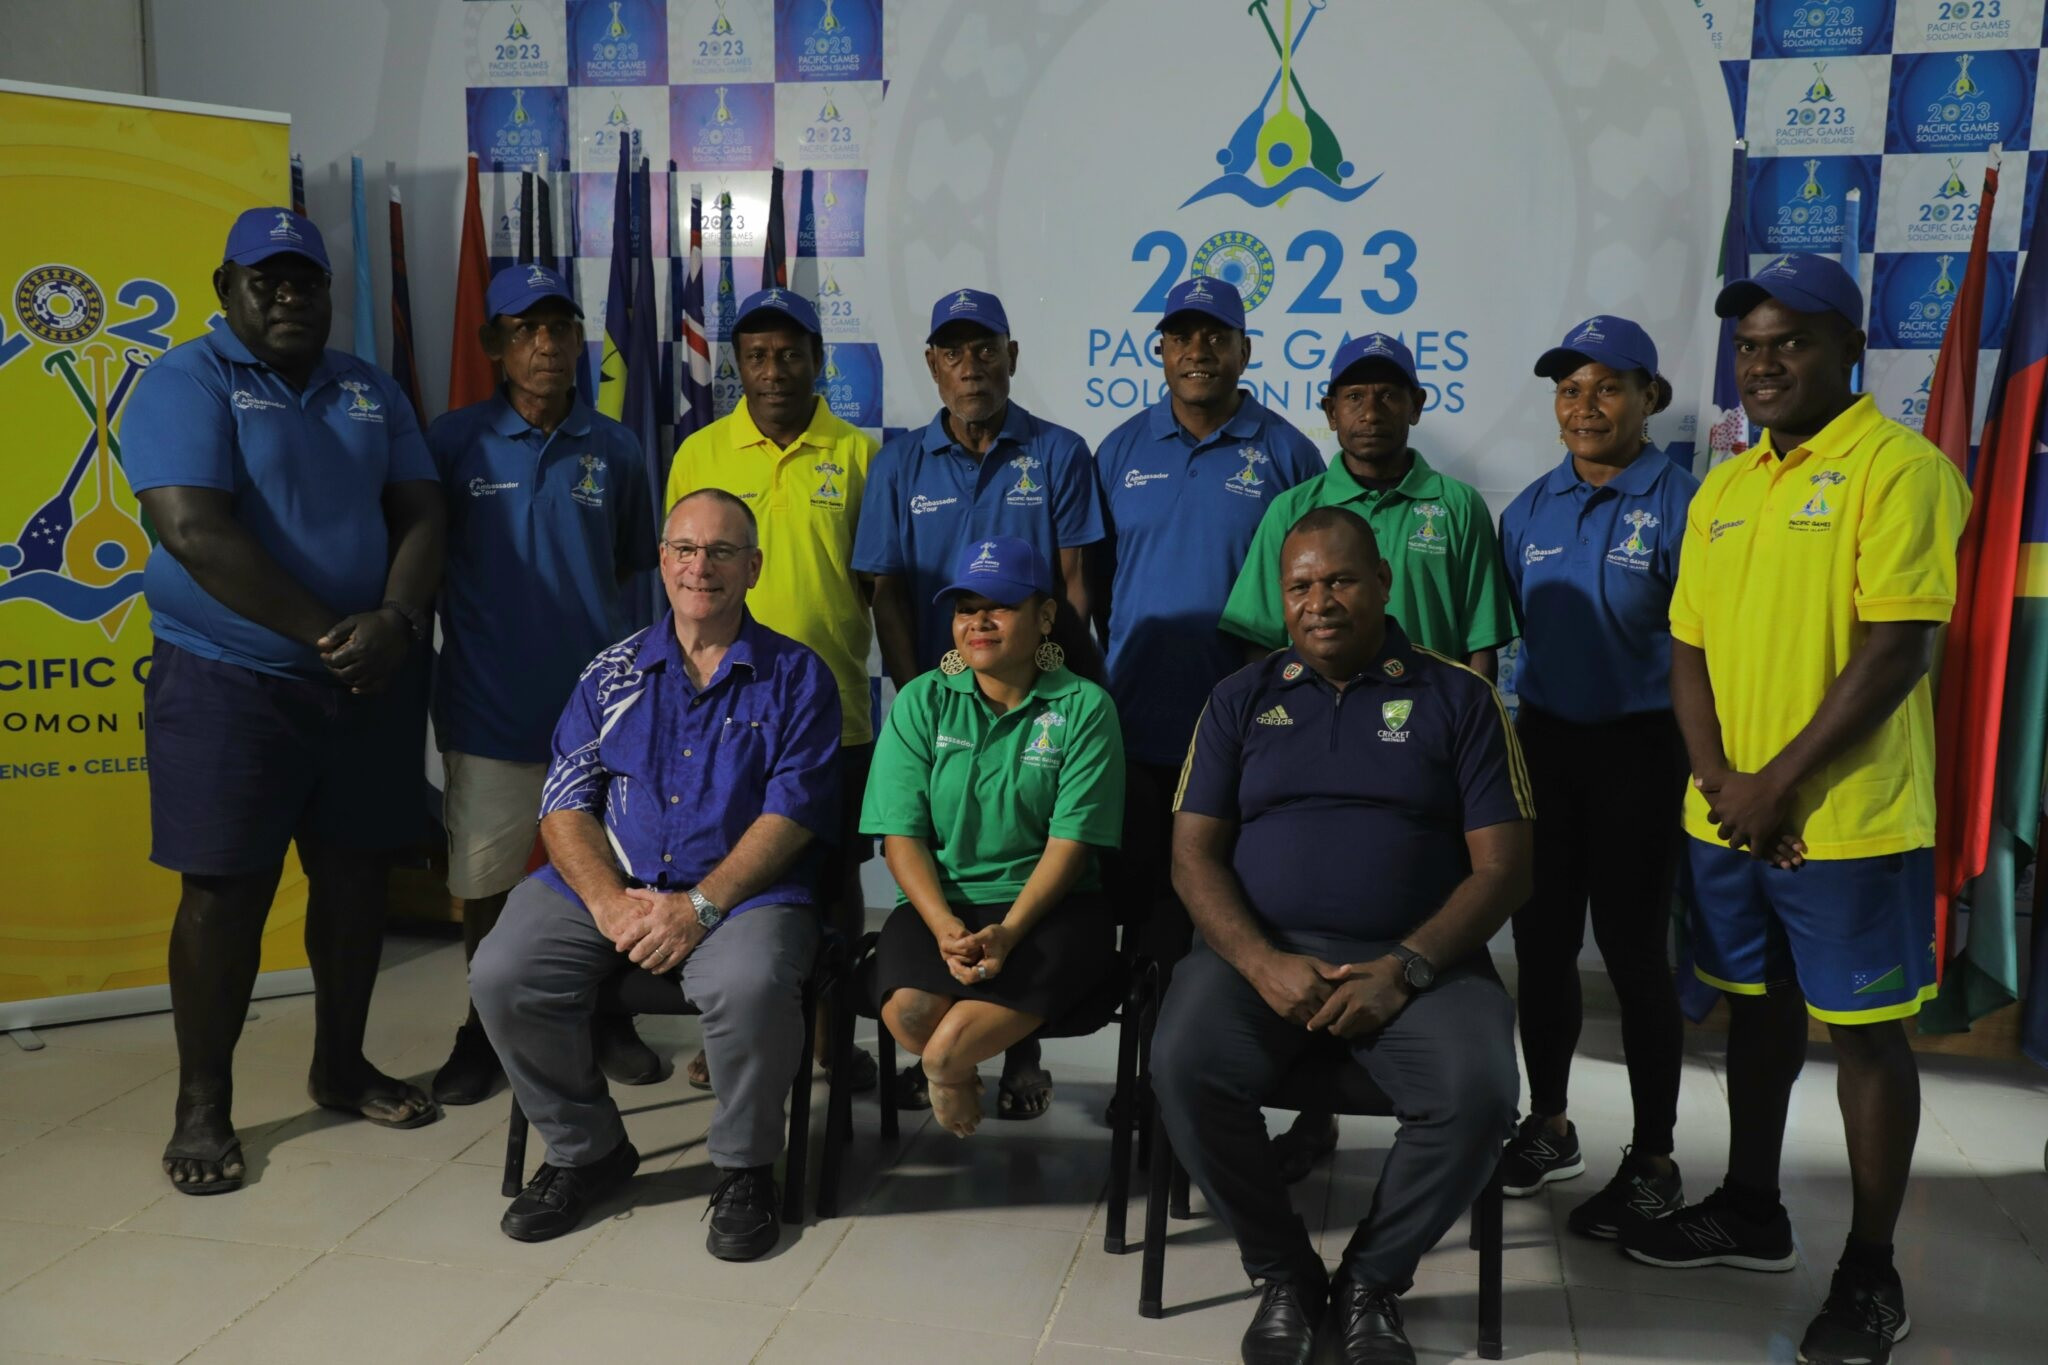 Nine former and current athletes have been selected as Solomon Islands 2023 ambassadors ©Solomon Islands 2023